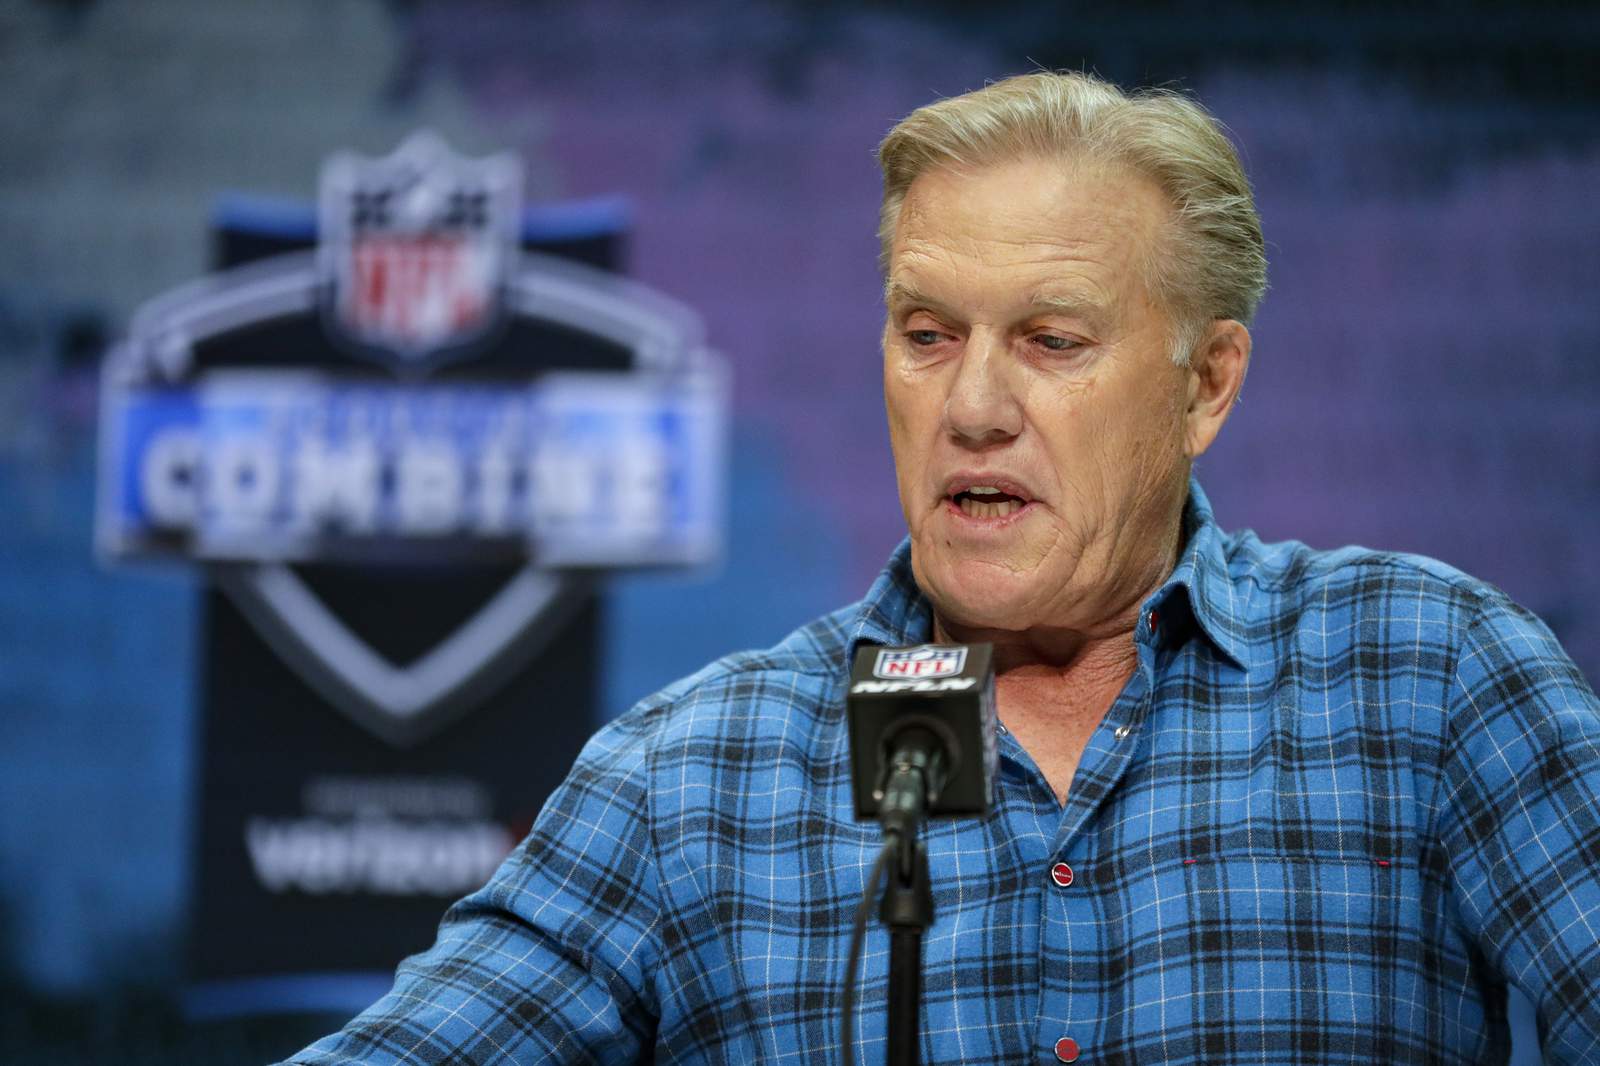 Elway joins call for change after George Lloyd's killing